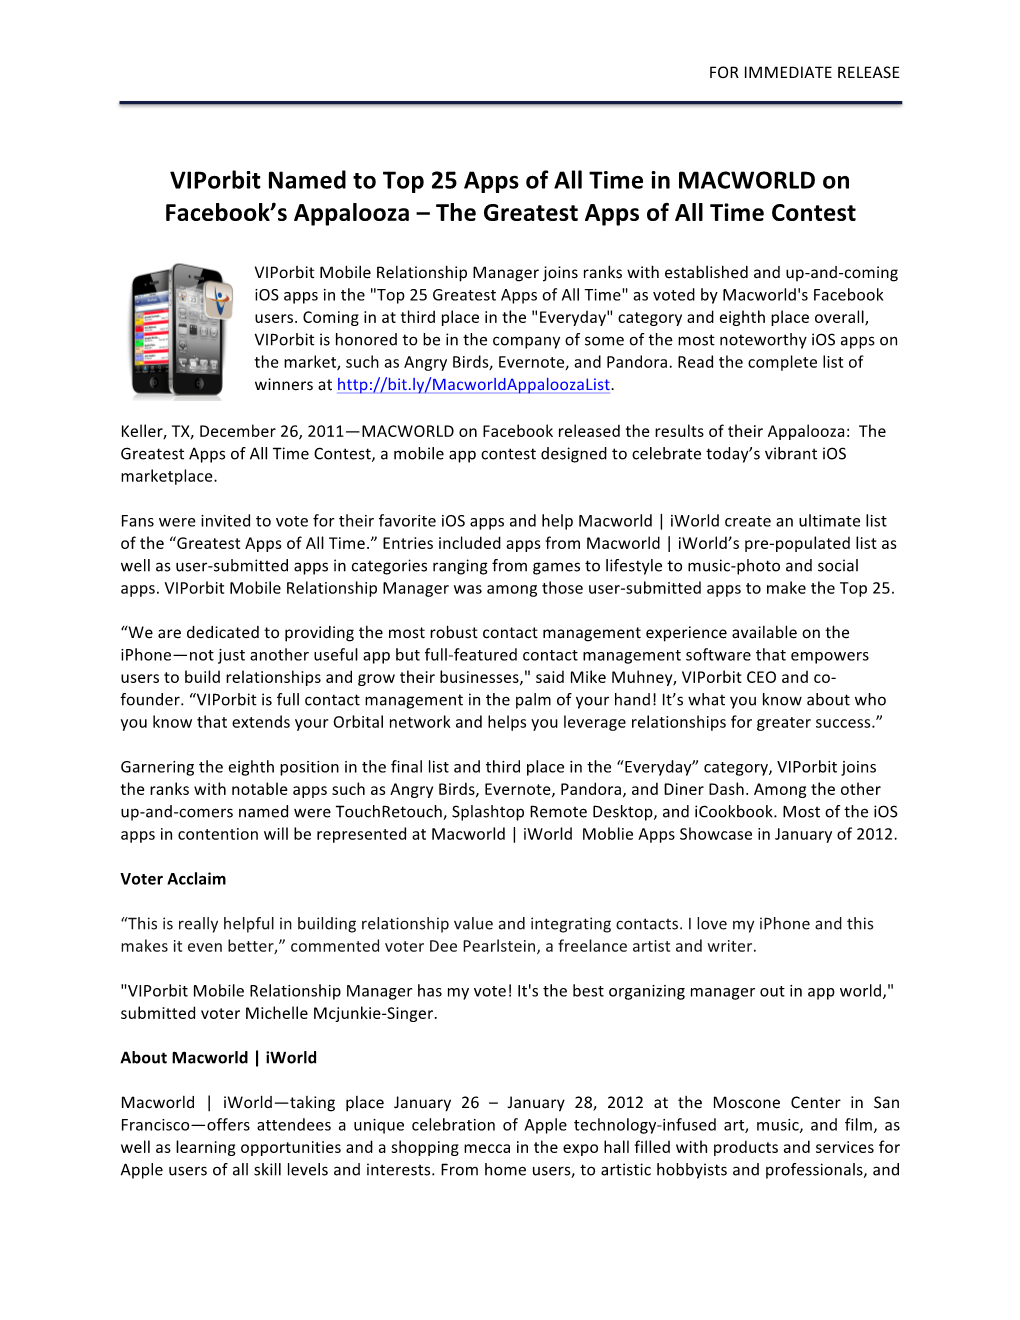 Viporbit Named to Top 25 Apps of All Time in MACWORLD on Facebook’S Appalooza – the Greatest Apps of All Time Contest